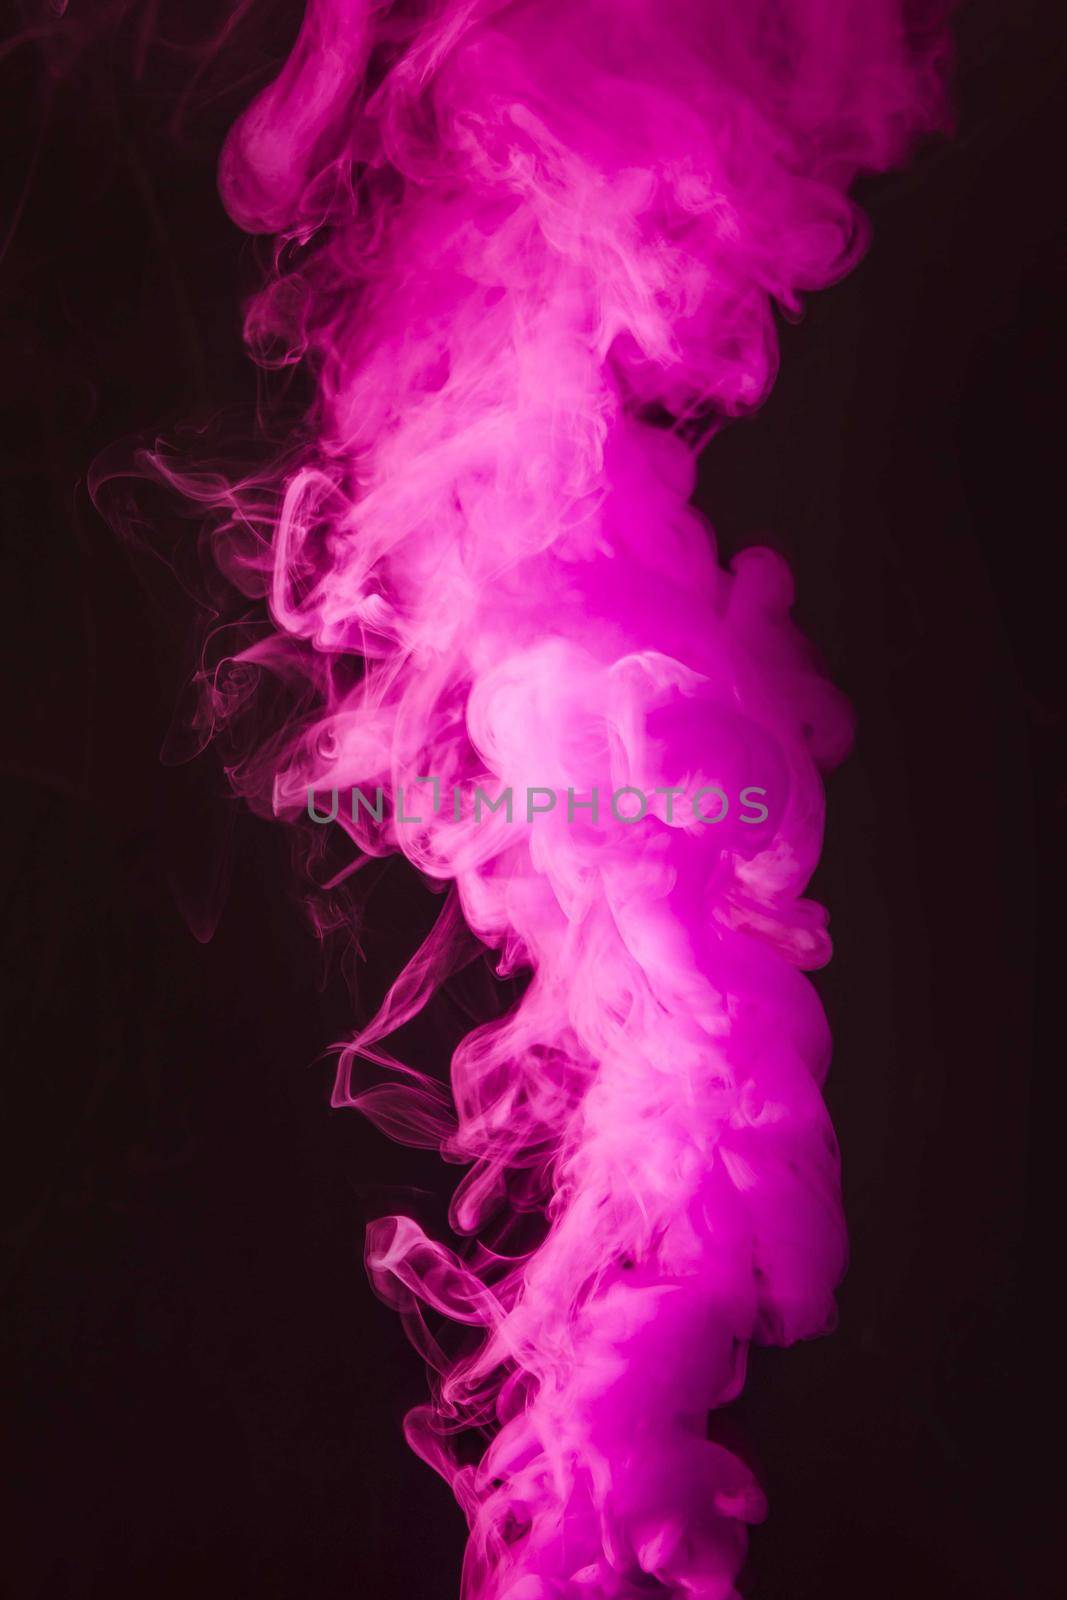 abstract dense fluffy puffs of pink smoke on black background by Zahard